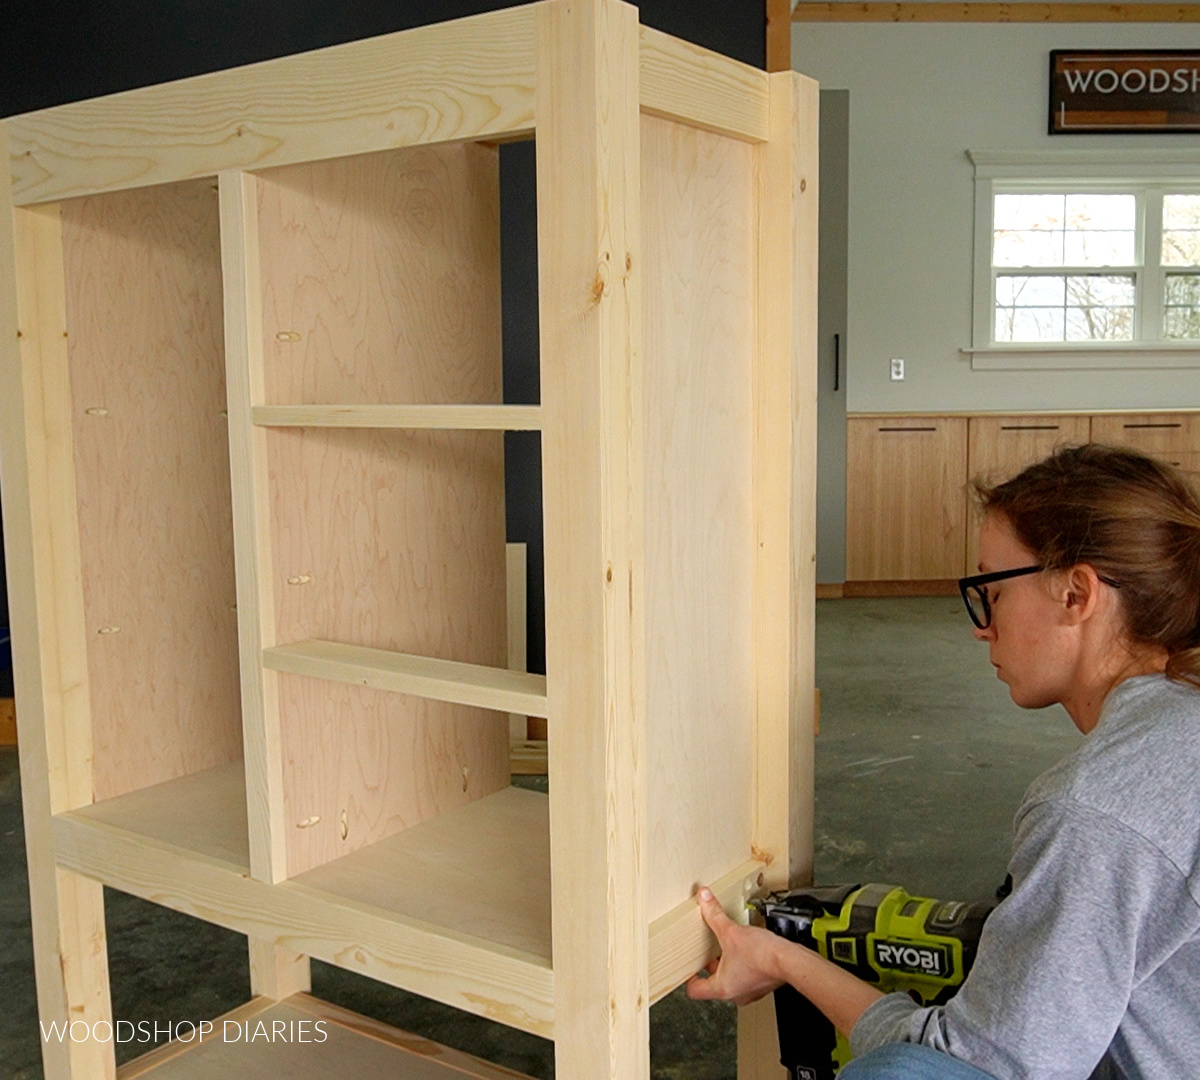 Shara Woodshop Diaries nailing 1x3s on sides of cabinet